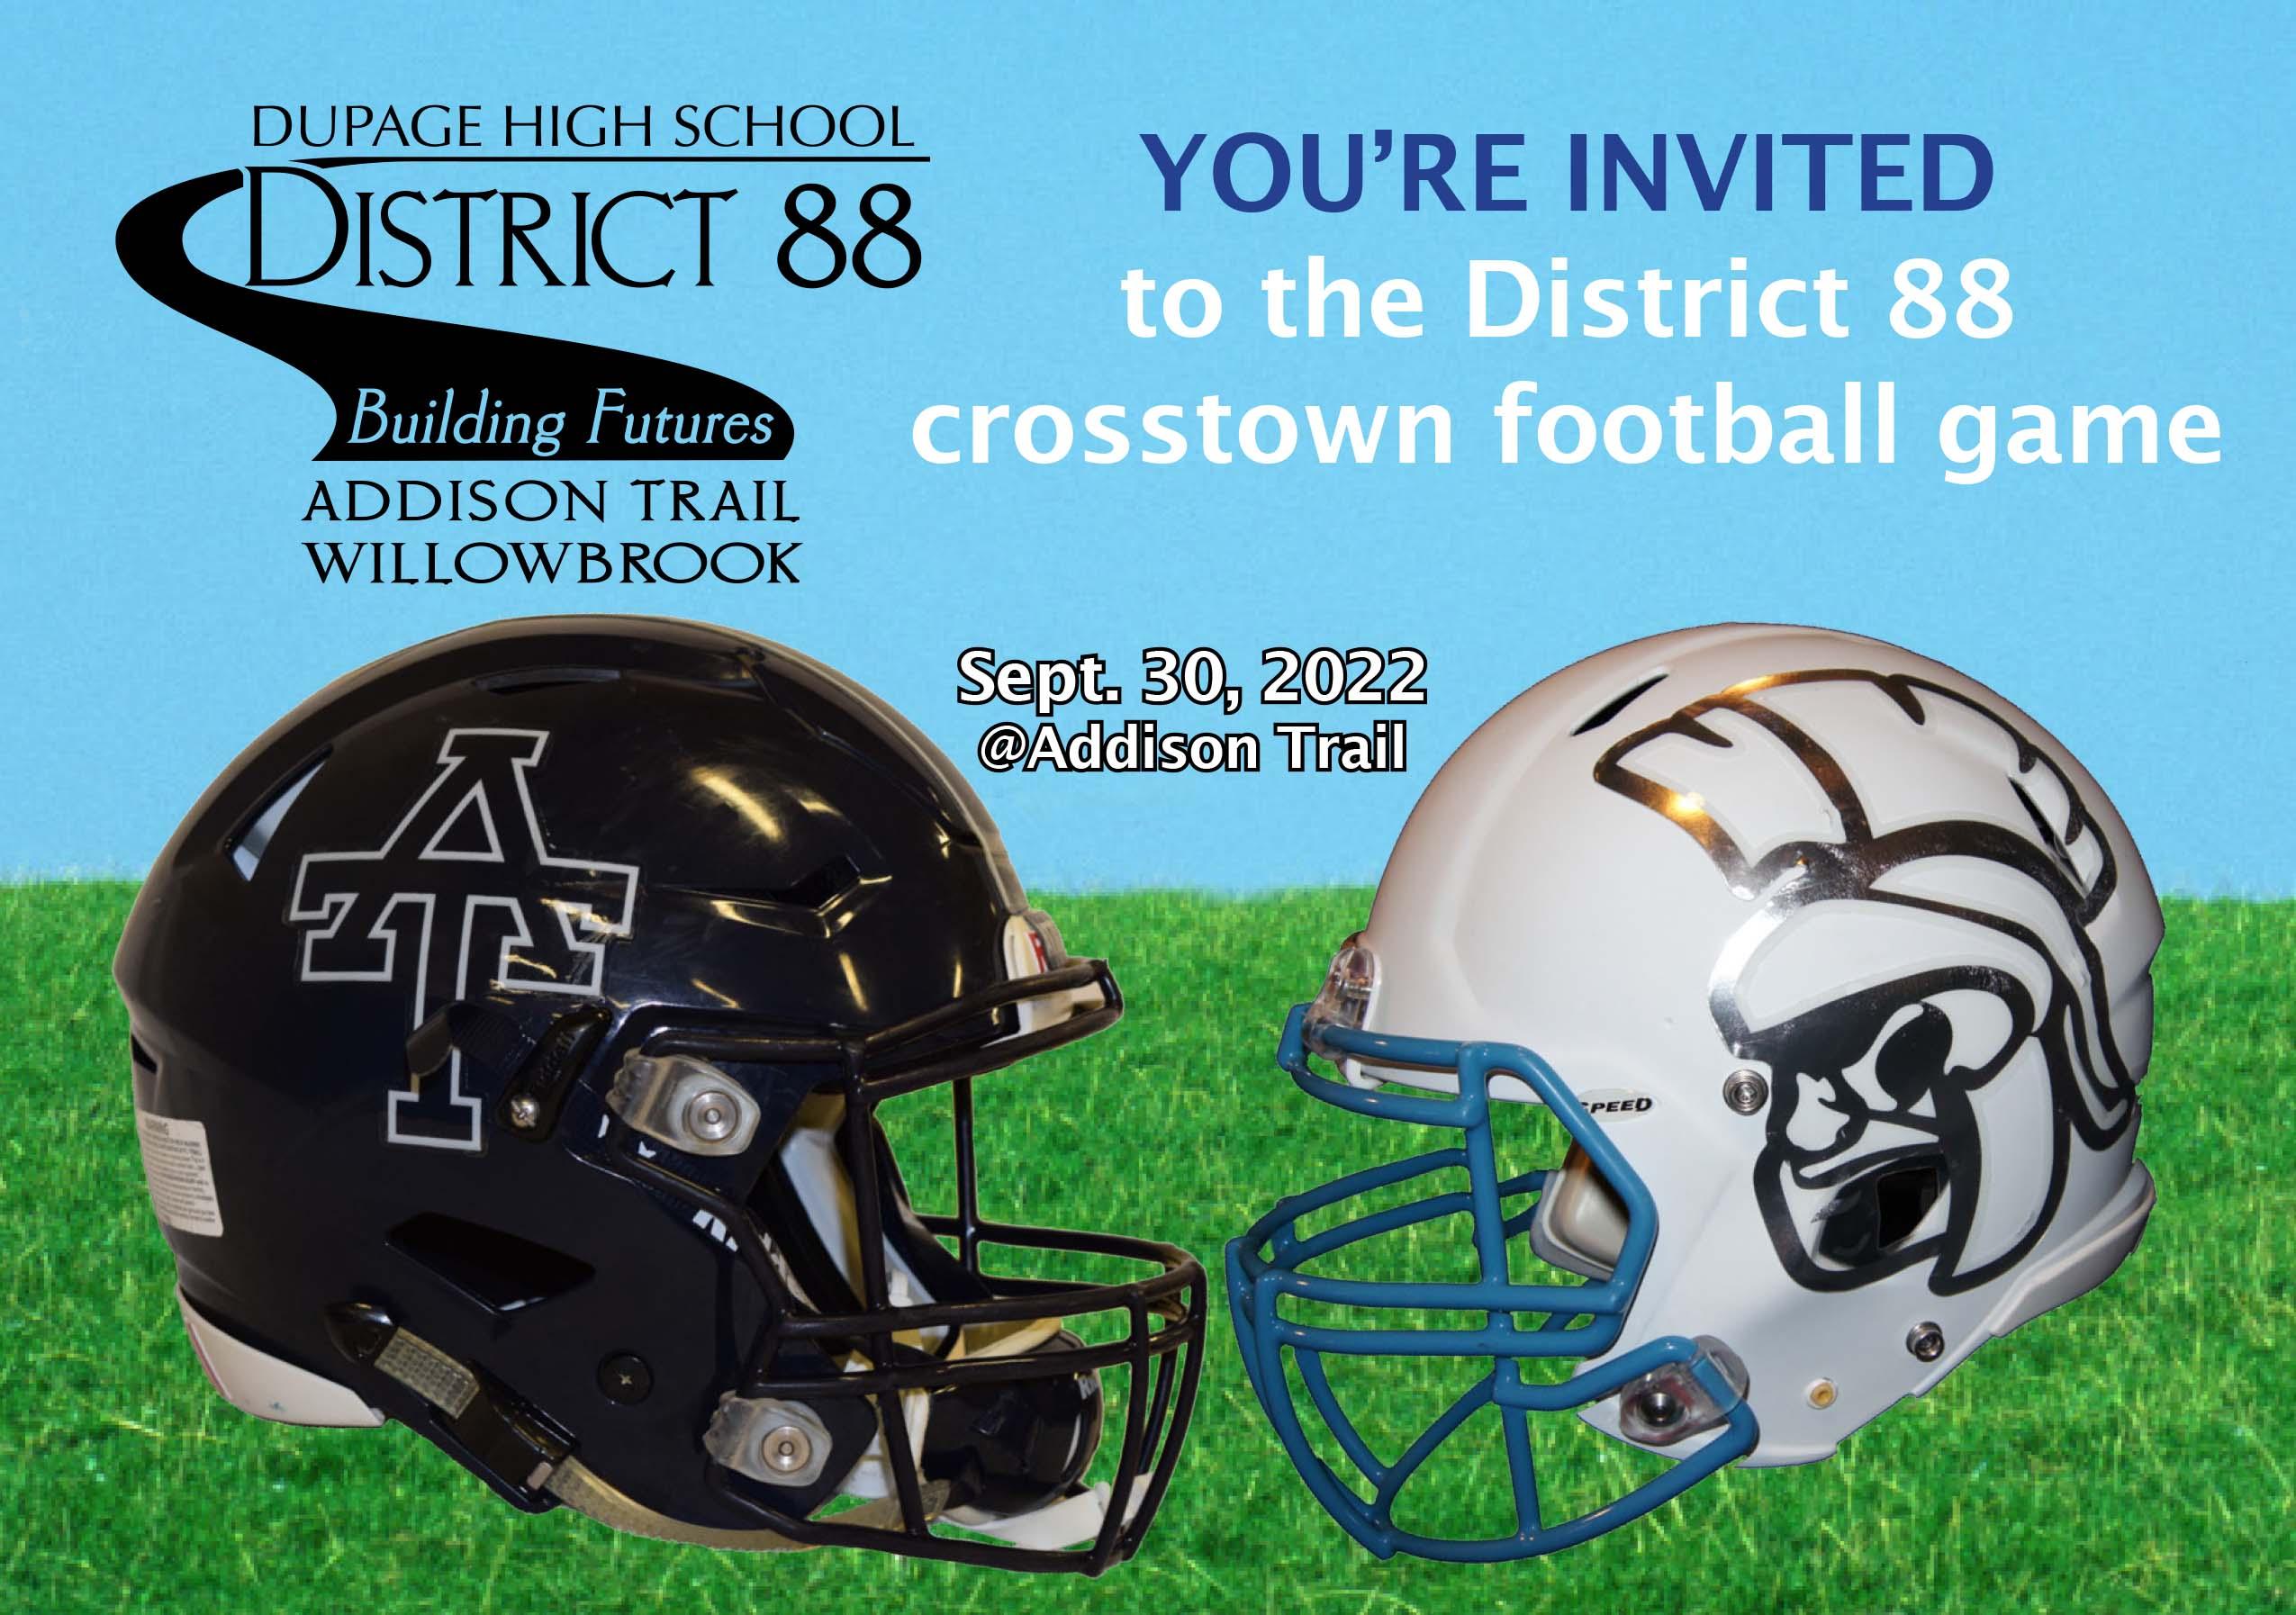 District 88 invites stakeholders to attend Crosstown Classic Football Game